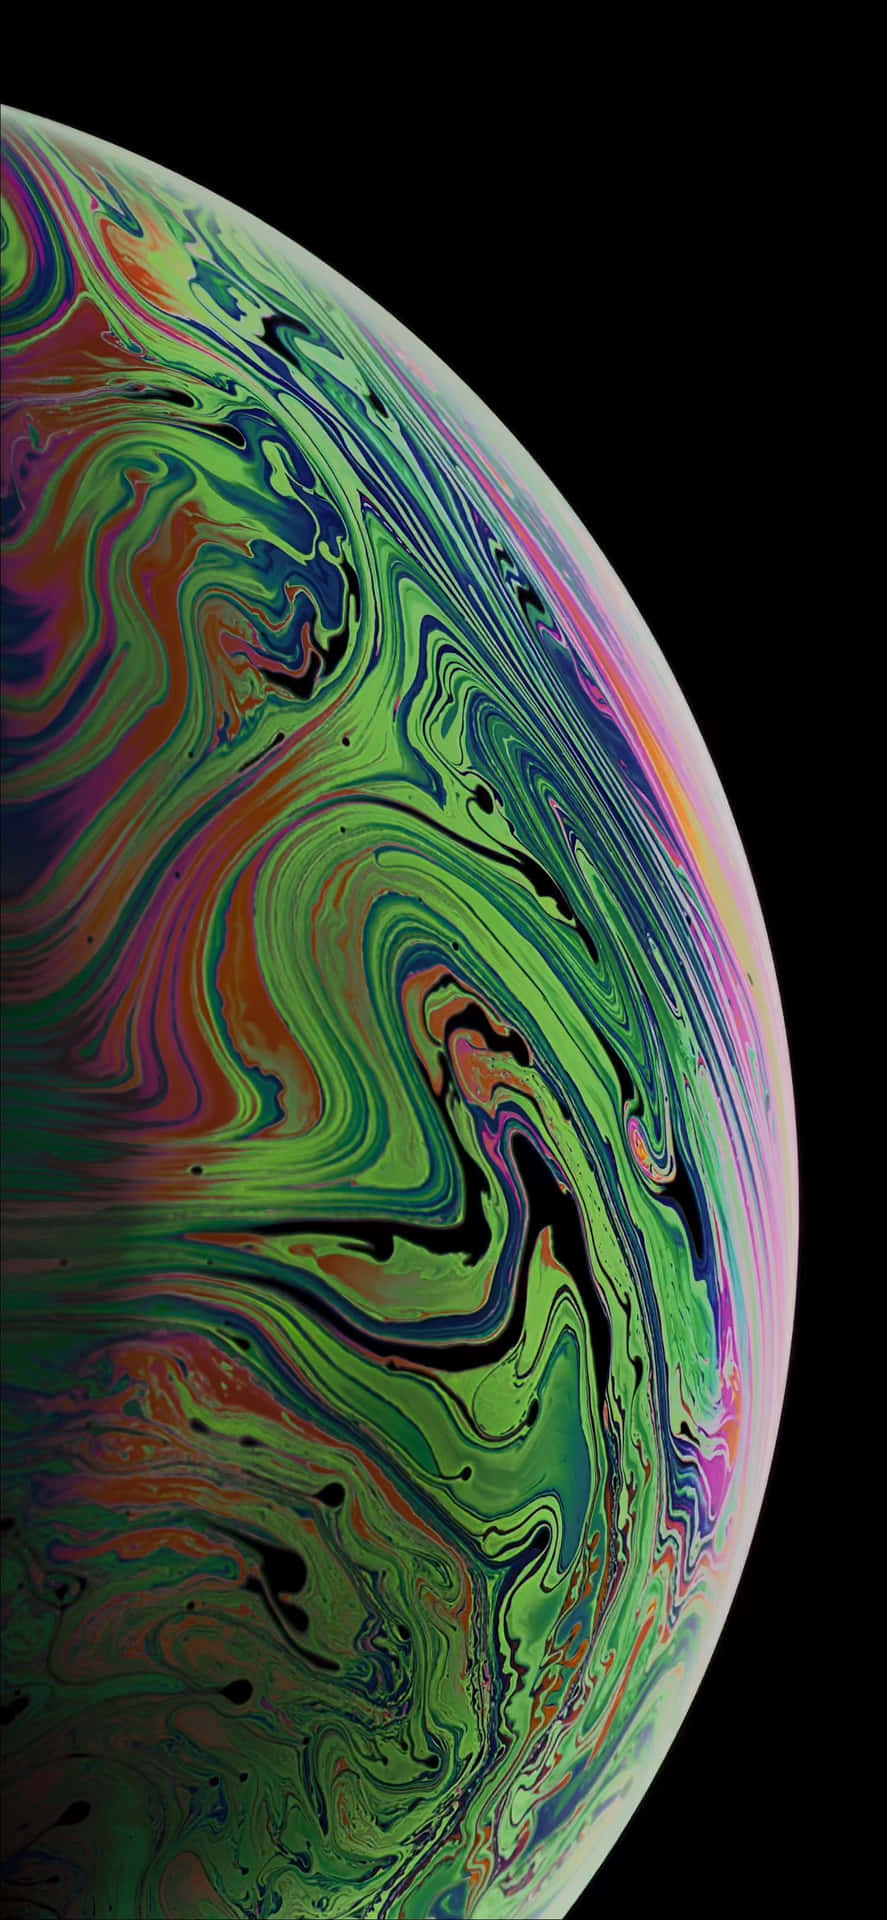 Captivating Marble iPhone Wallpaper